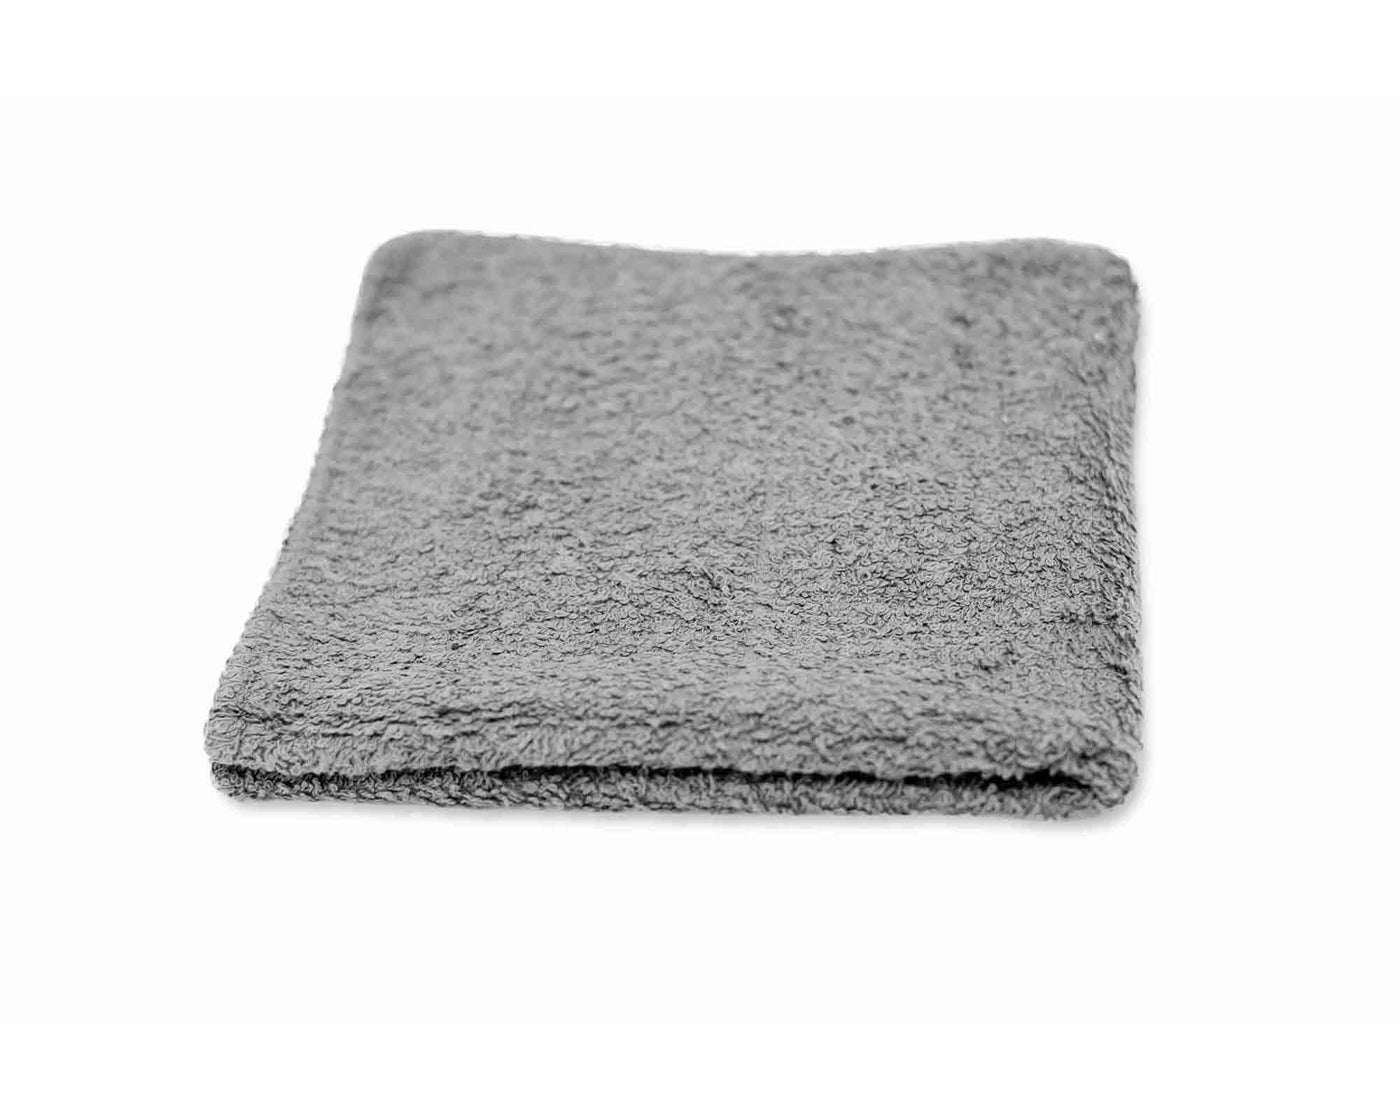 grey serge terry towel with white background